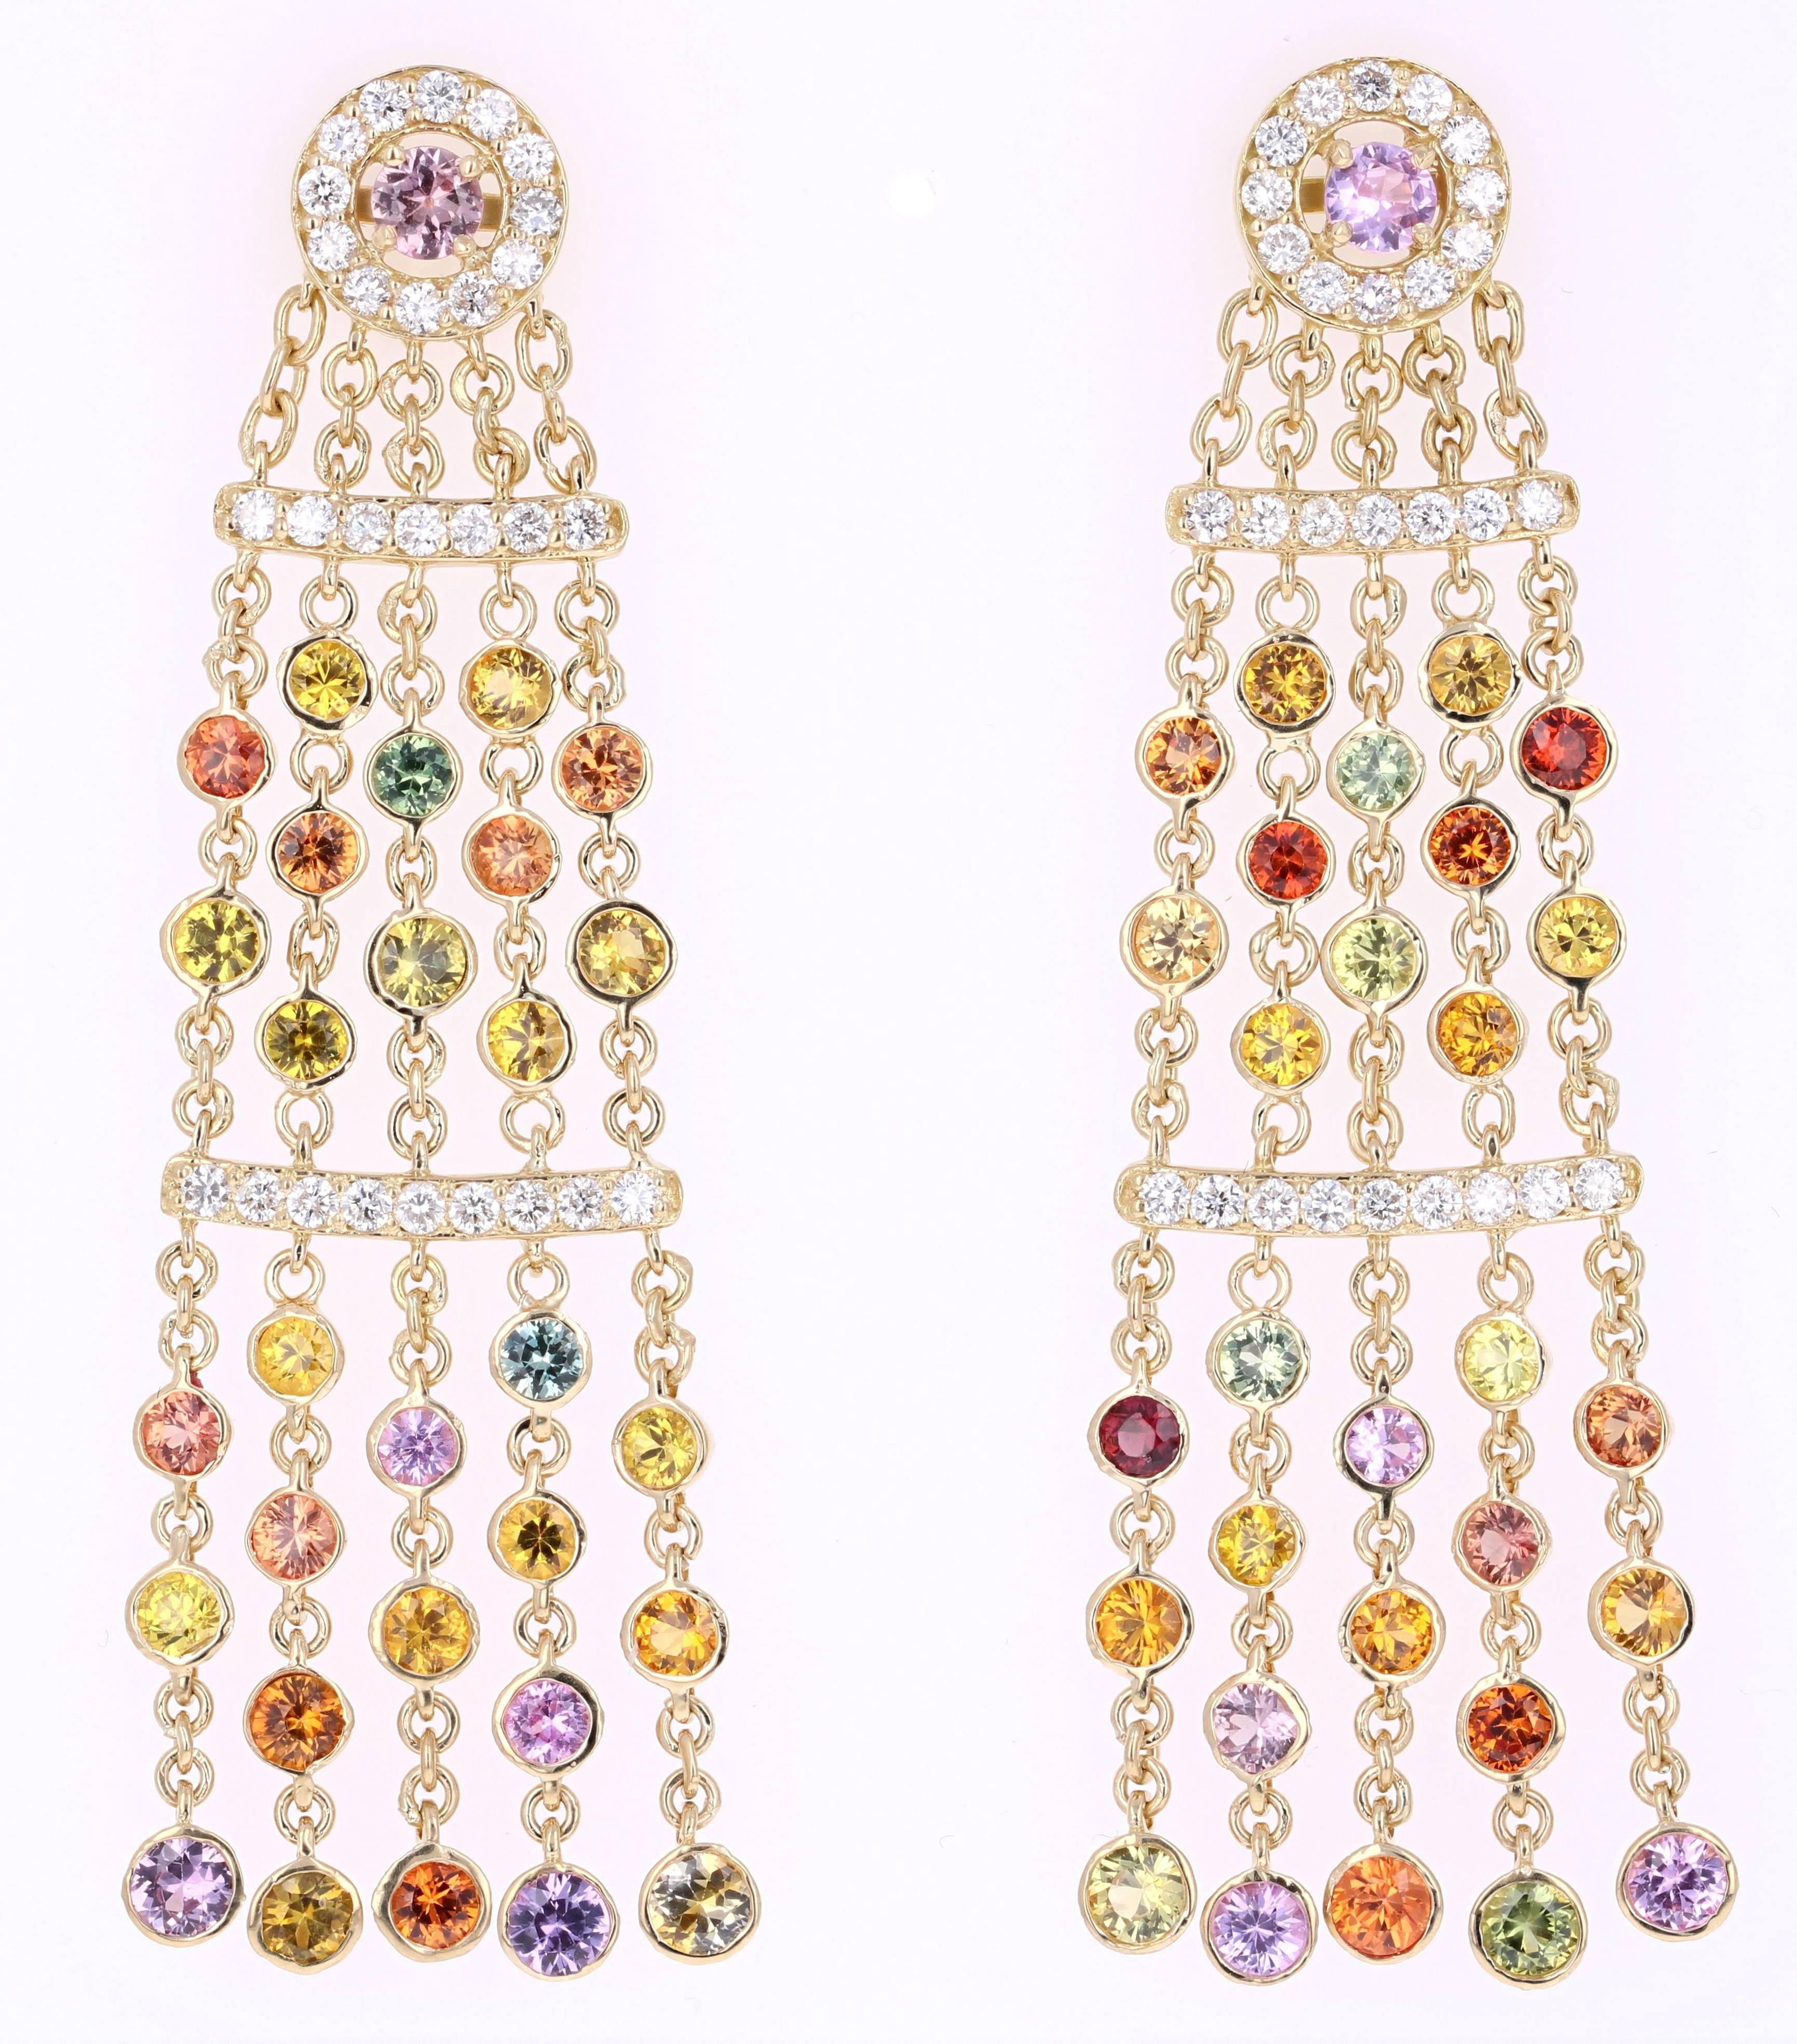 7.95 Carat Multi-Colored Sapphire Diamond Dangle Yellow Gold Earrings!!

Gorgeous is simply an understatement!!! These beautiful earrings have 60 Round Cut Multi-Colored Sapphires that are falling like a delicate rain fall and weigh 6.70 carats.